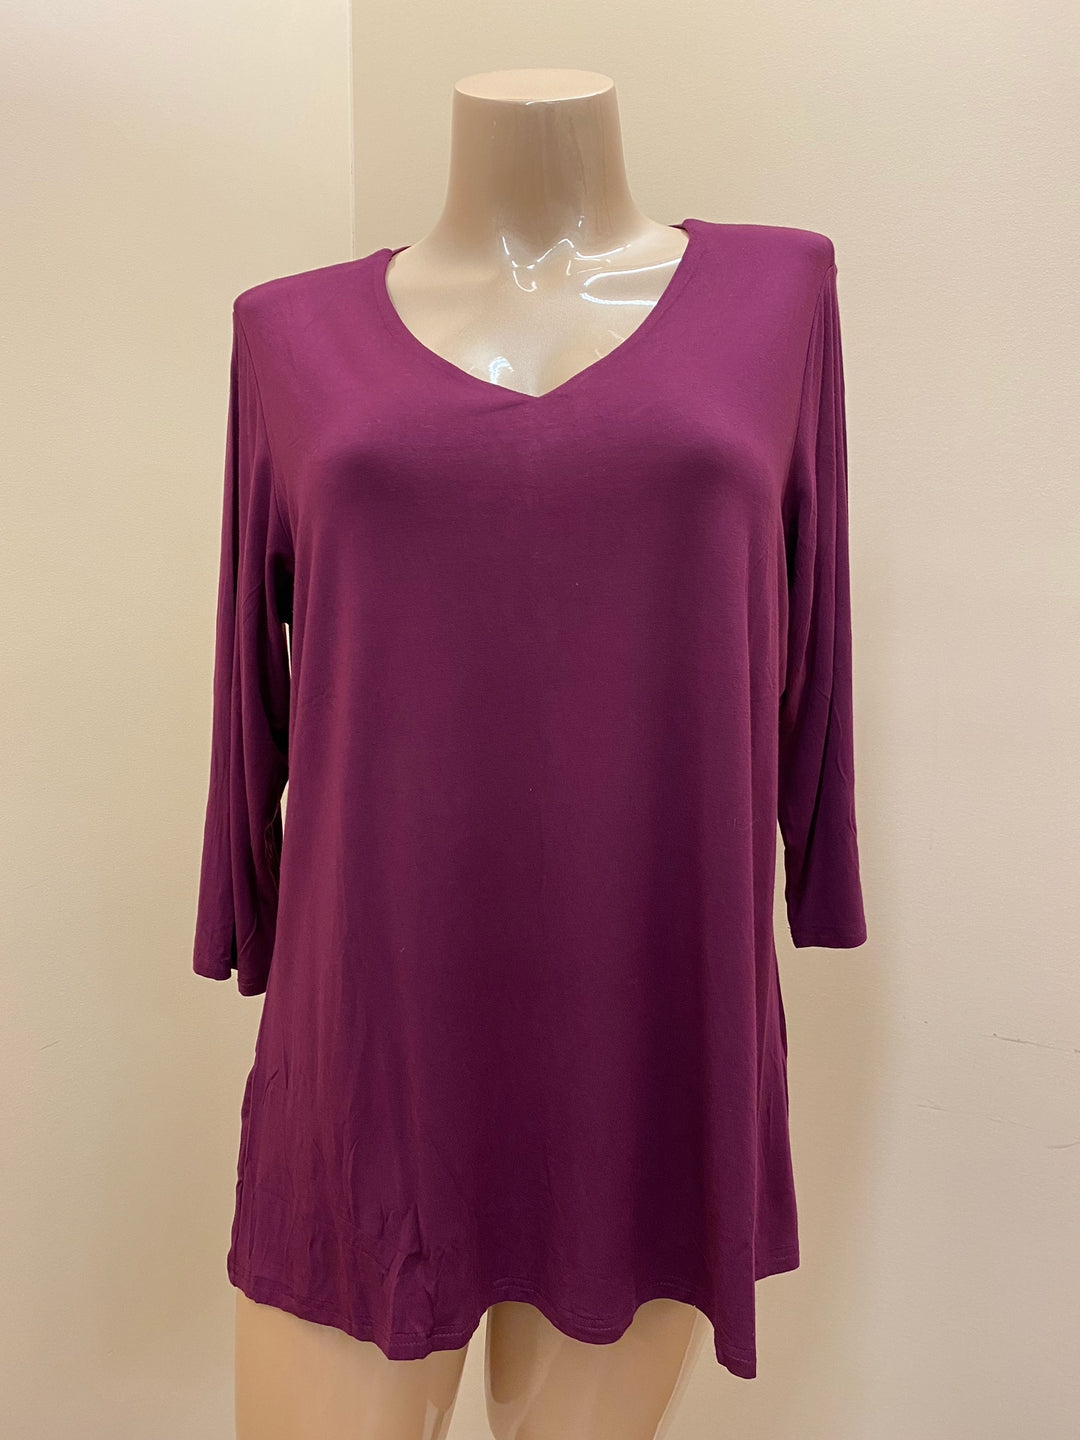 Mia Bamboo  Top - Deep Orchid - Size 2 X